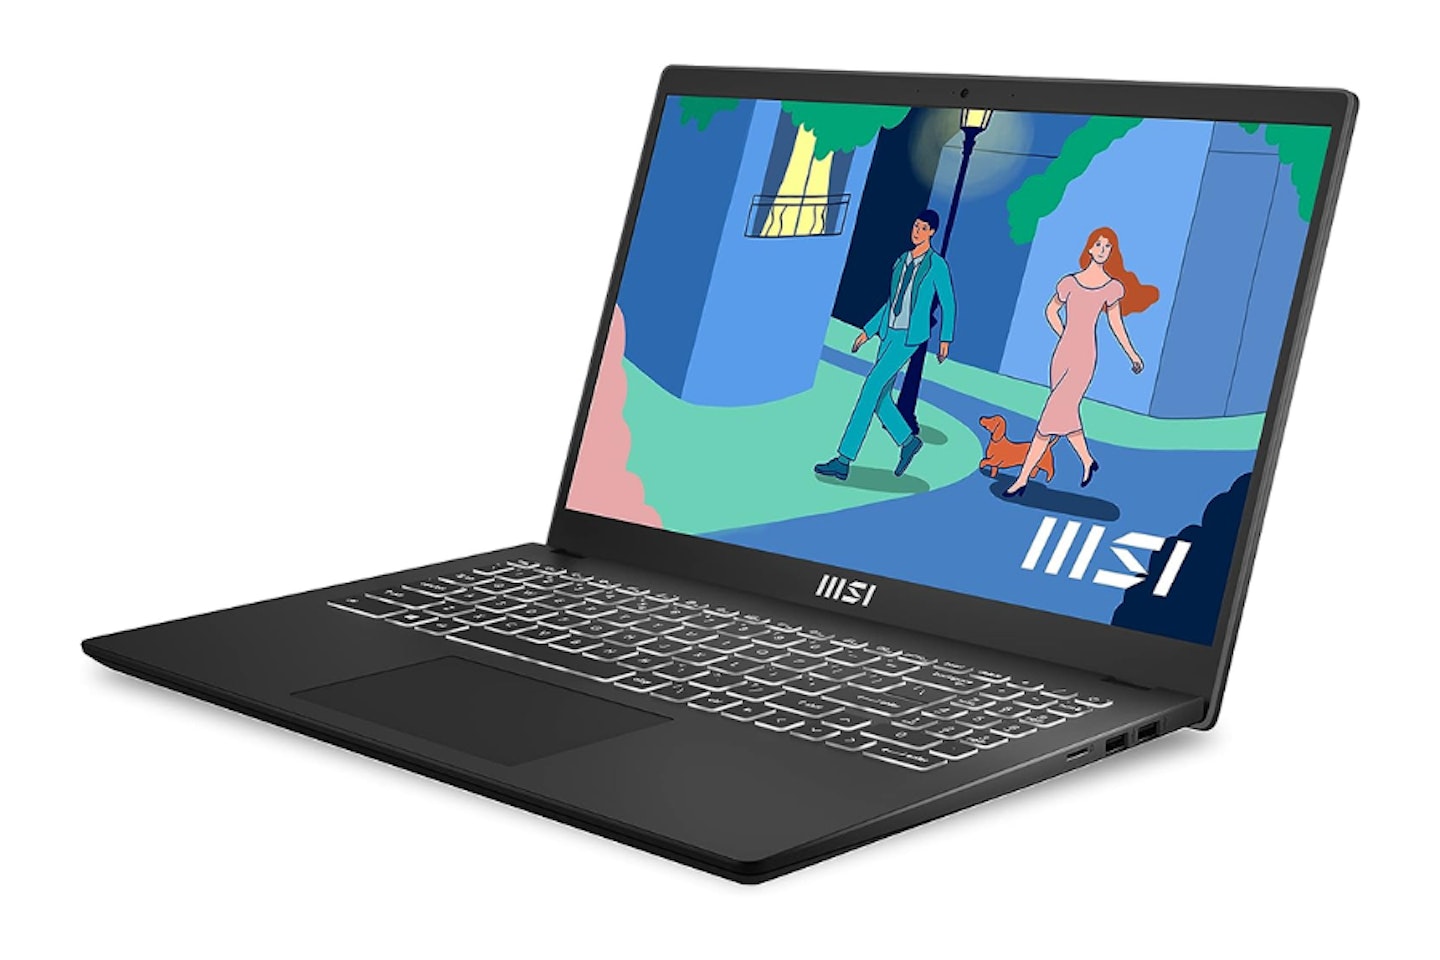 MSI Modern 15 Inch FHD Laptop - one of the best windows laptops